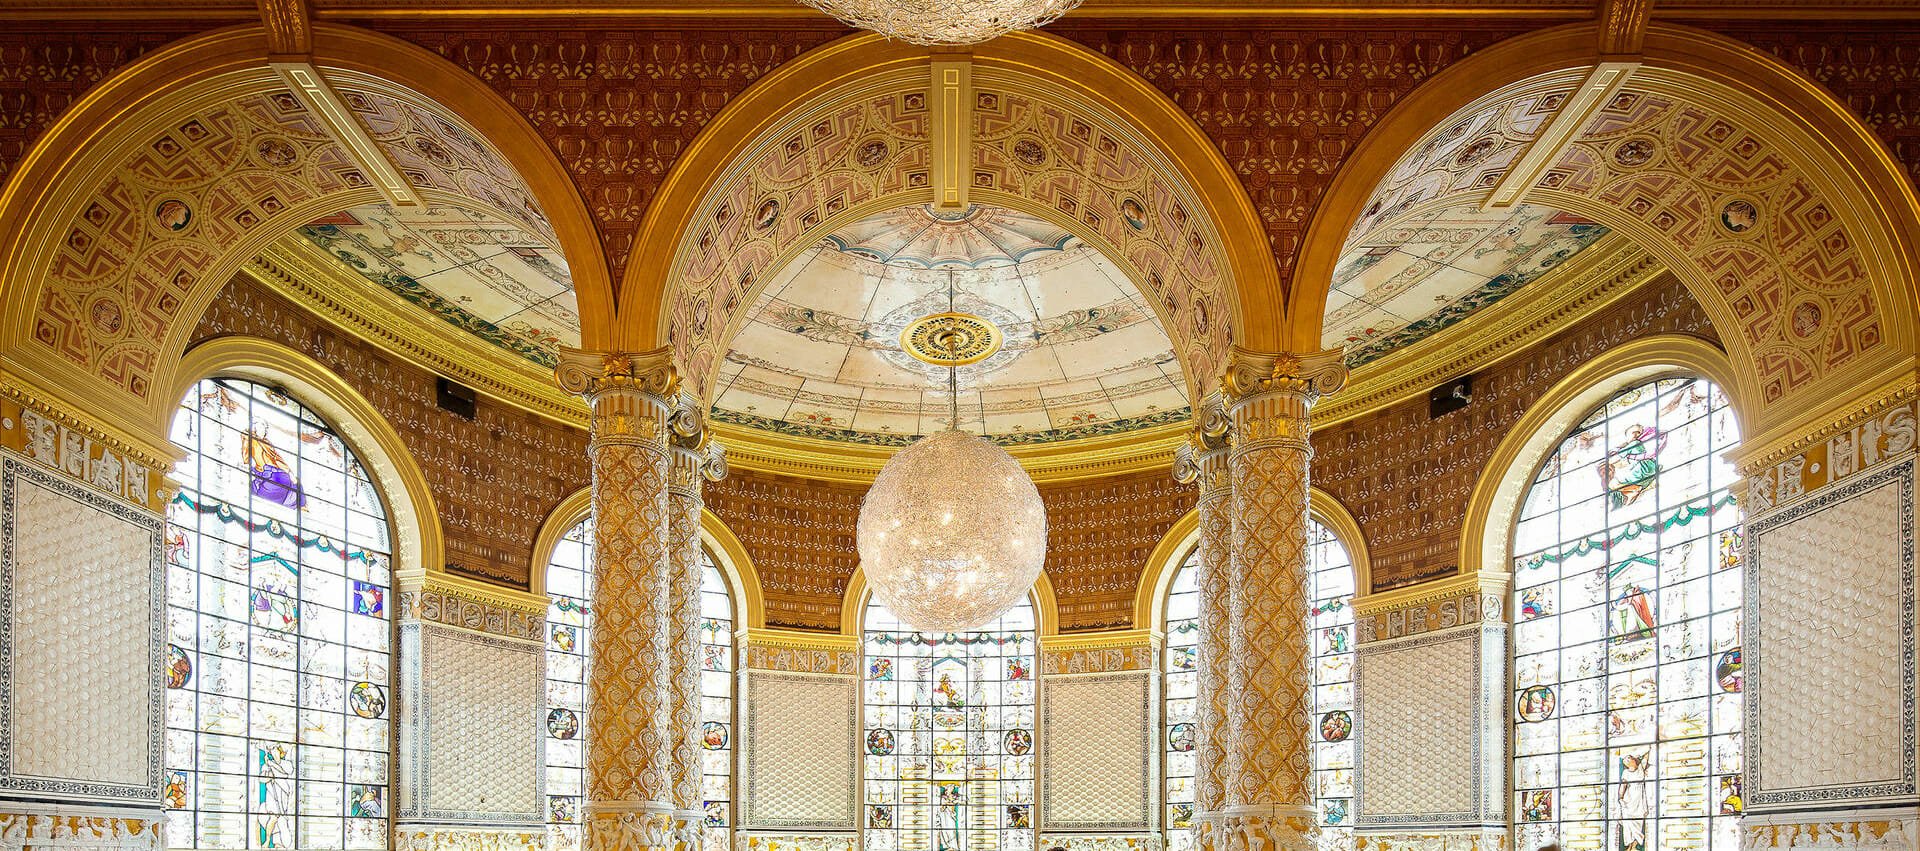 The V&A Museum - London's Free Museum of Arts, Crafts & Design